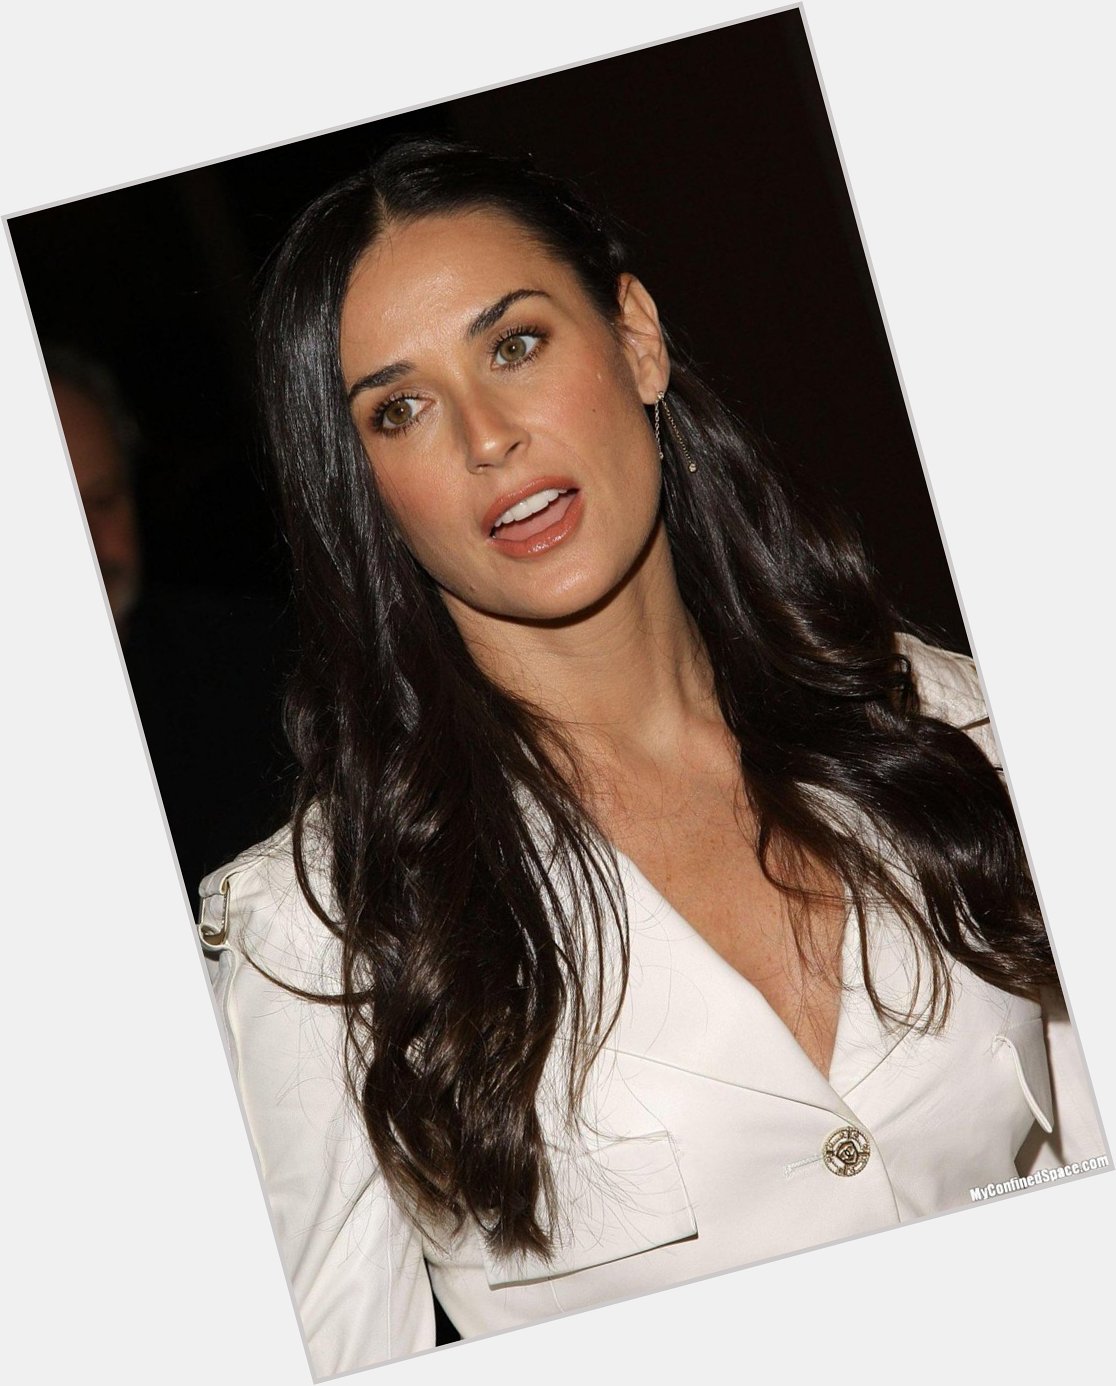 Happy Birthday to Demi Moore, who turns 52 today! 